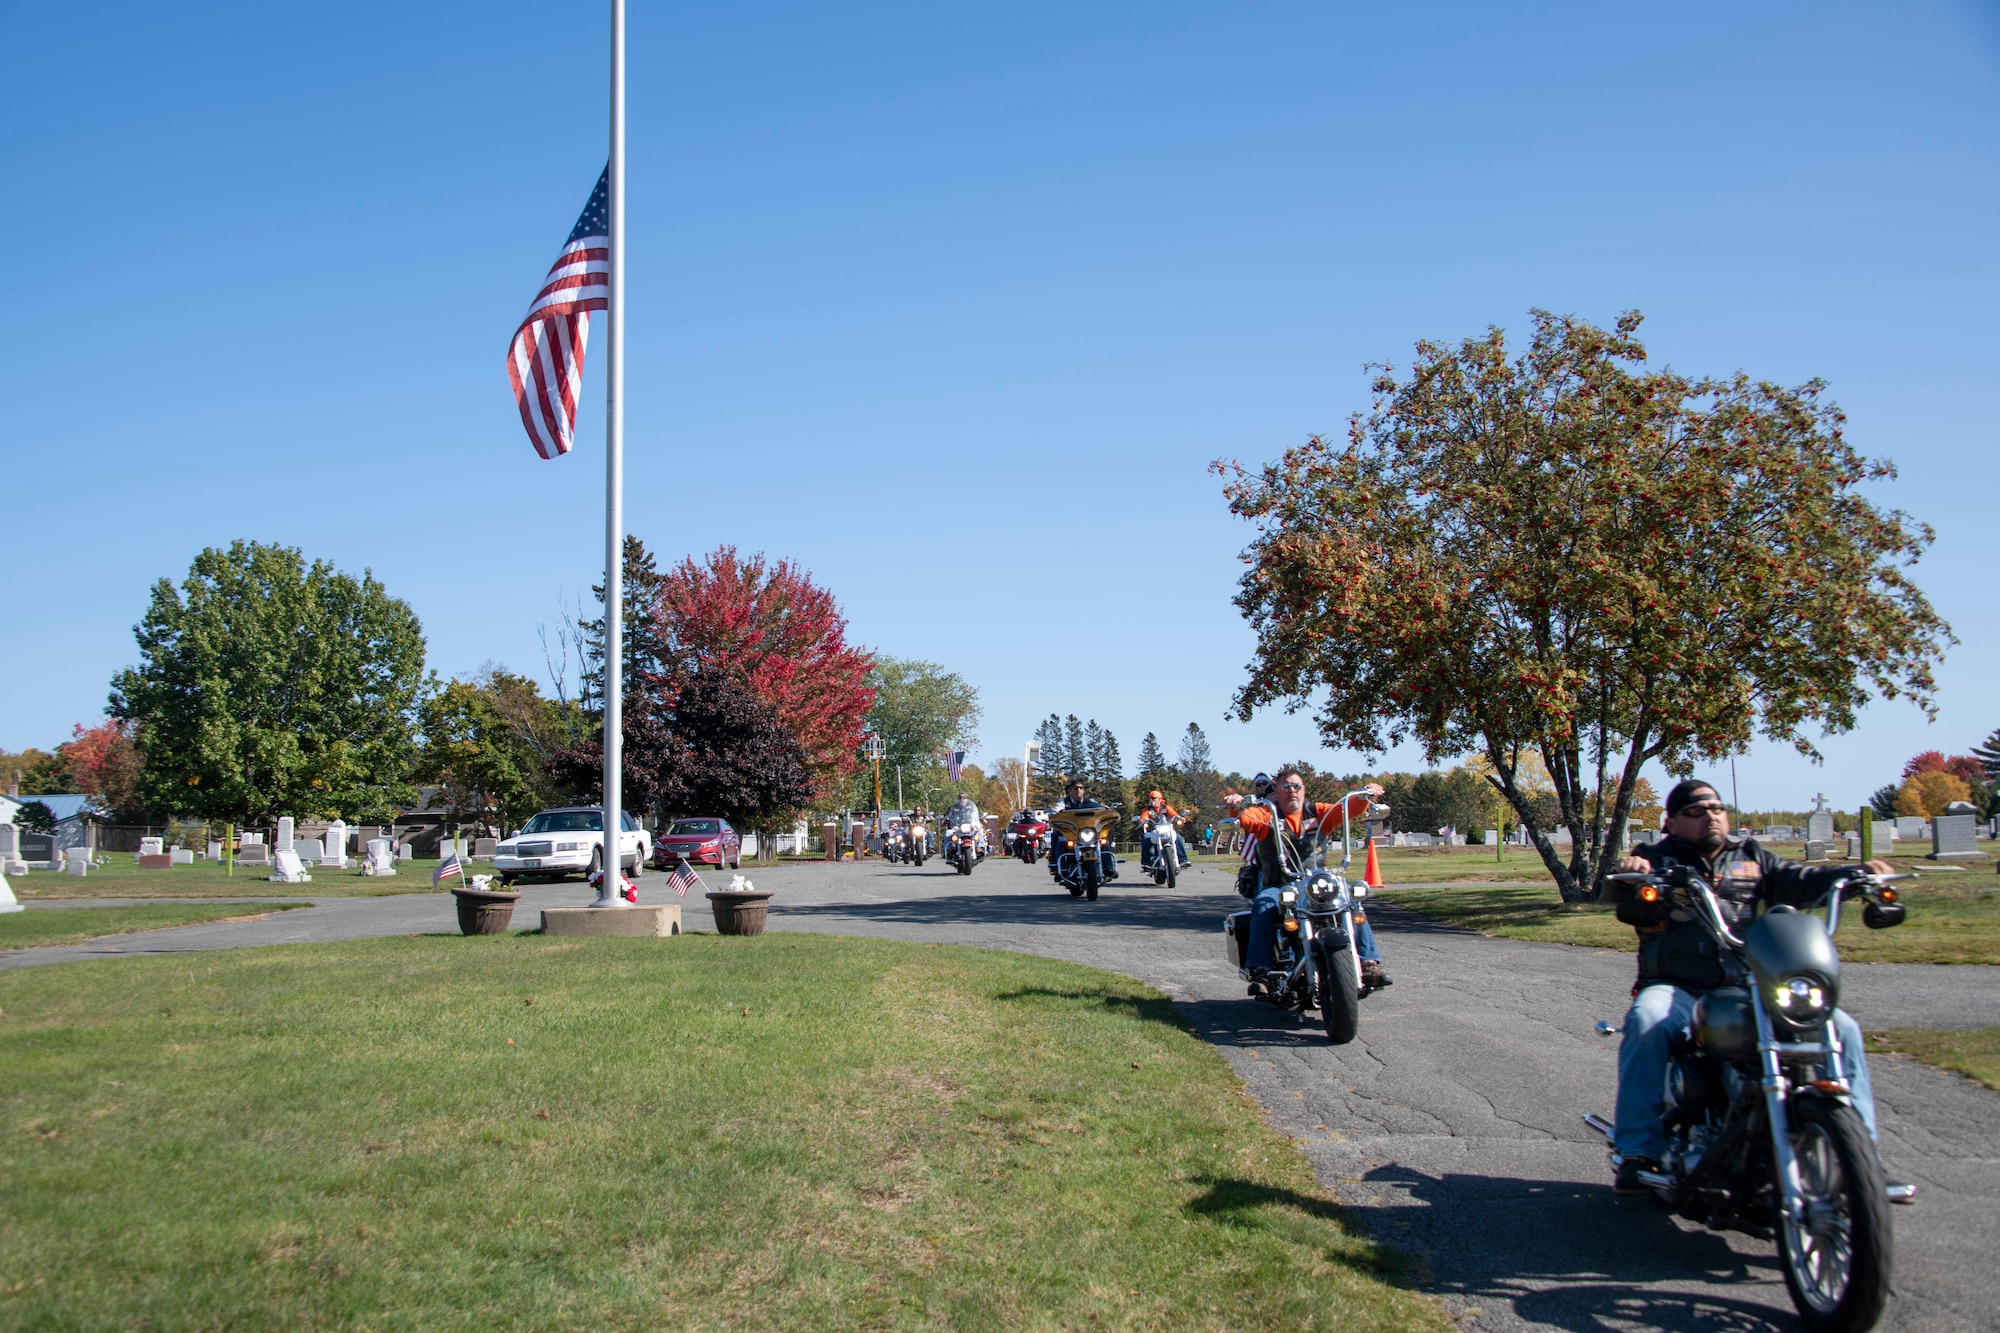 Motorcyclists from the Patriot Riders escort the funeral procession team for the funeral of U.S. Army Air Forces 2nd Lt. Earnest Vienneau, 97th Bombardment Group, at Millinocket, Maine, Oct. 9, 2021. Groups like this form a voluntary honor guard at military burials, to help protect mourners from harassment and fill out the ranks at burials. (U.S. Air Force photo by Staff Sgt. Cody Dowell)